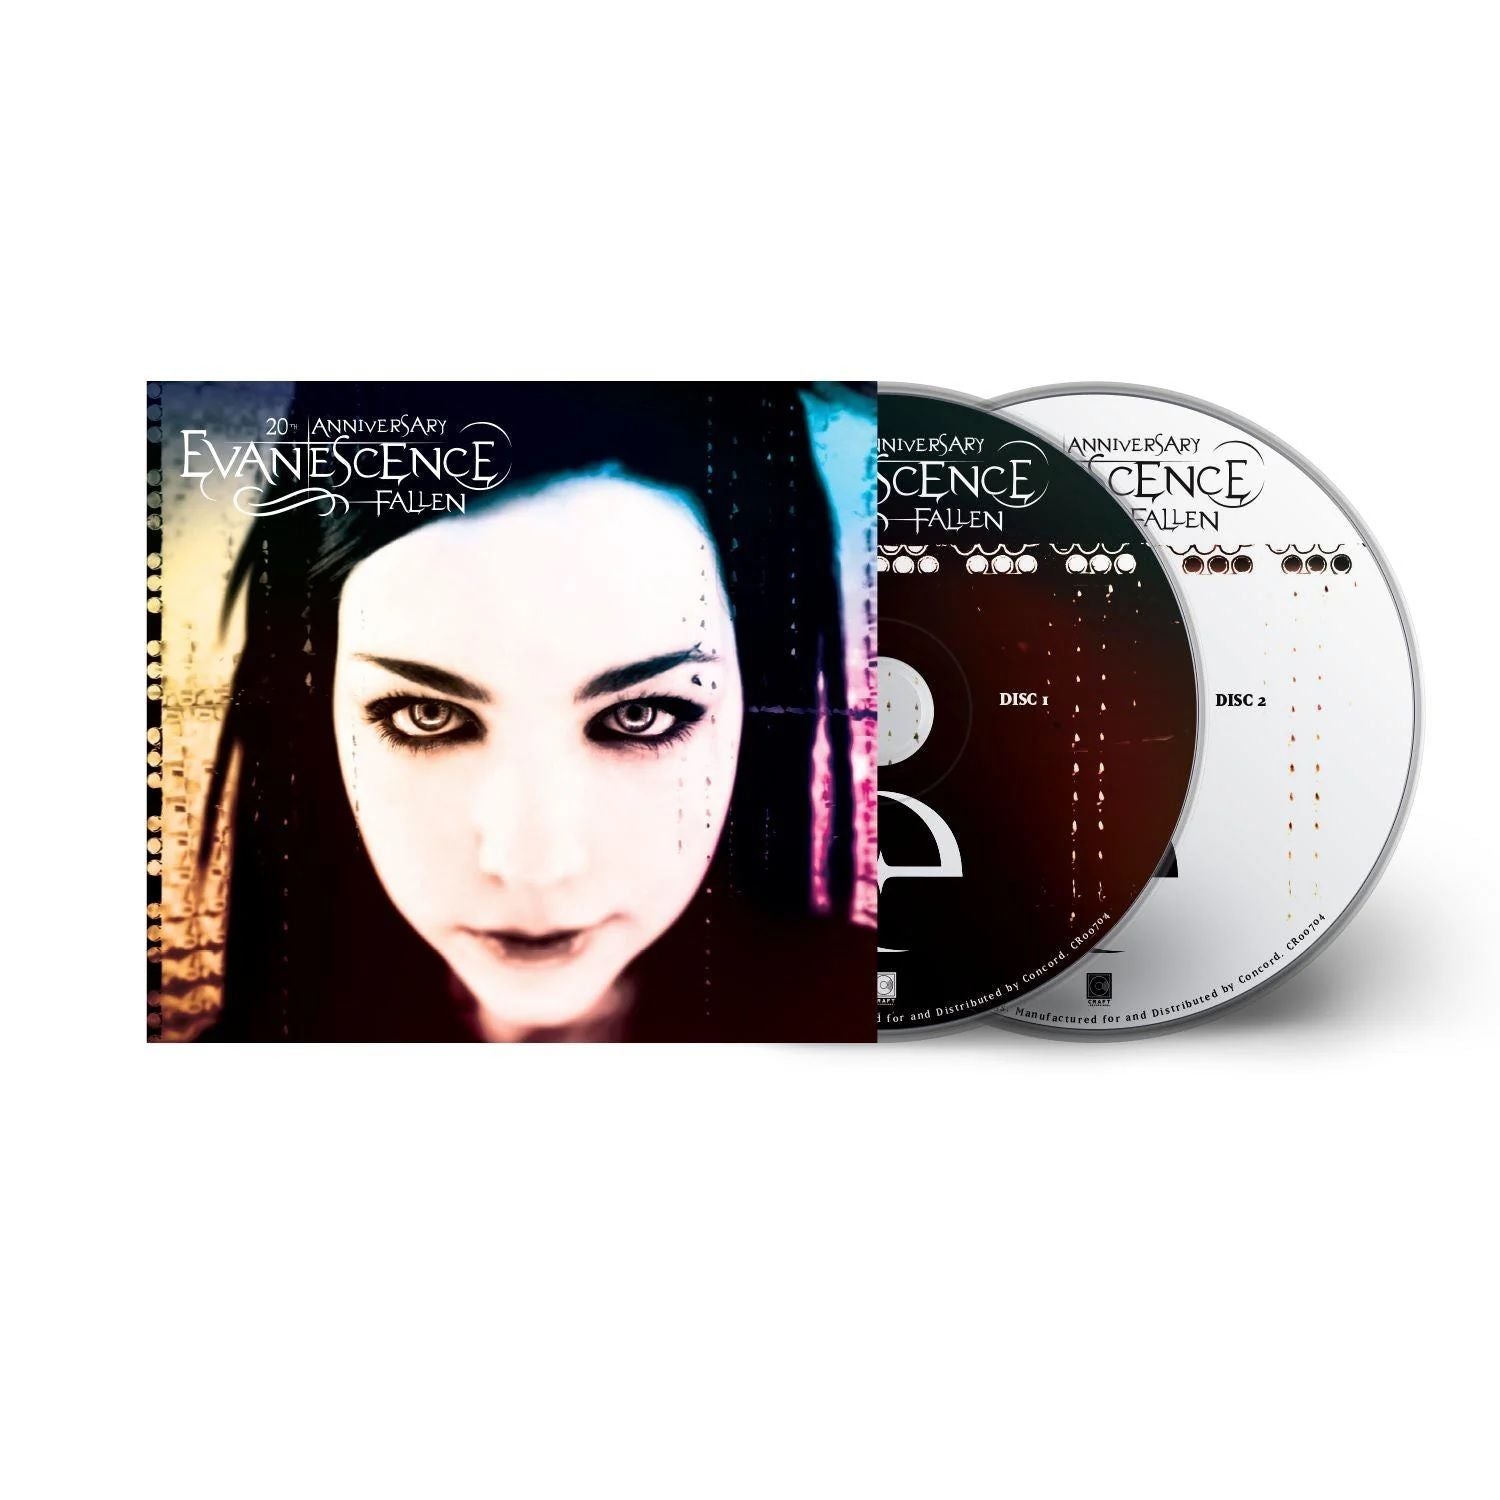 Evanescence - Fallen (20th Anniversary 2023 Deluxe Ed. 2CD remastered reissue) - CD - New